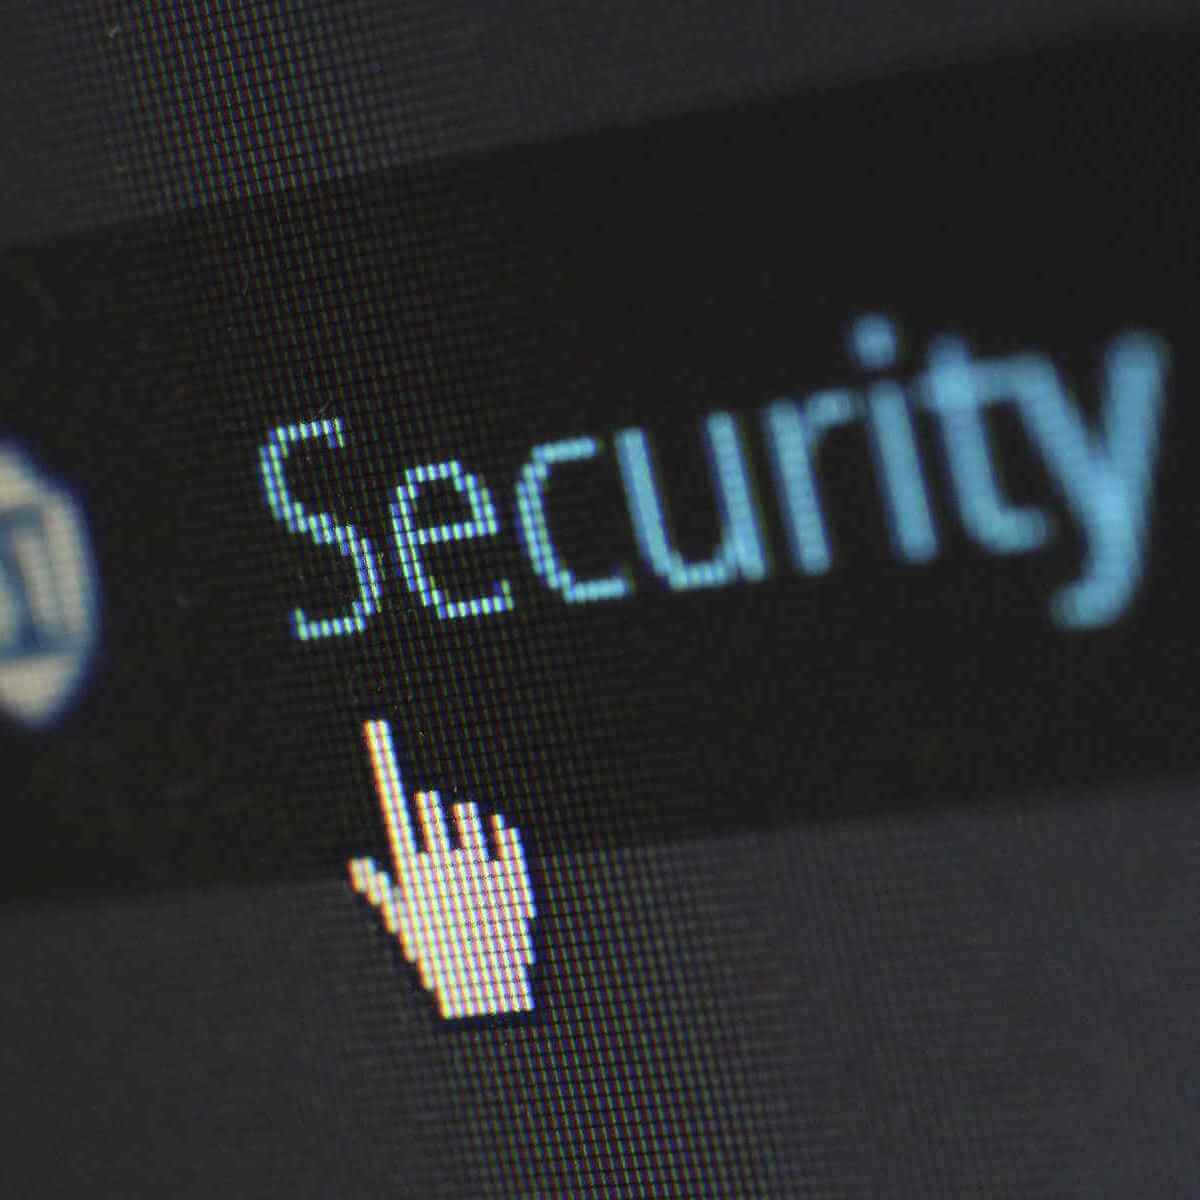 Azure Security Lab is Microsoft's new challenge for security researchers